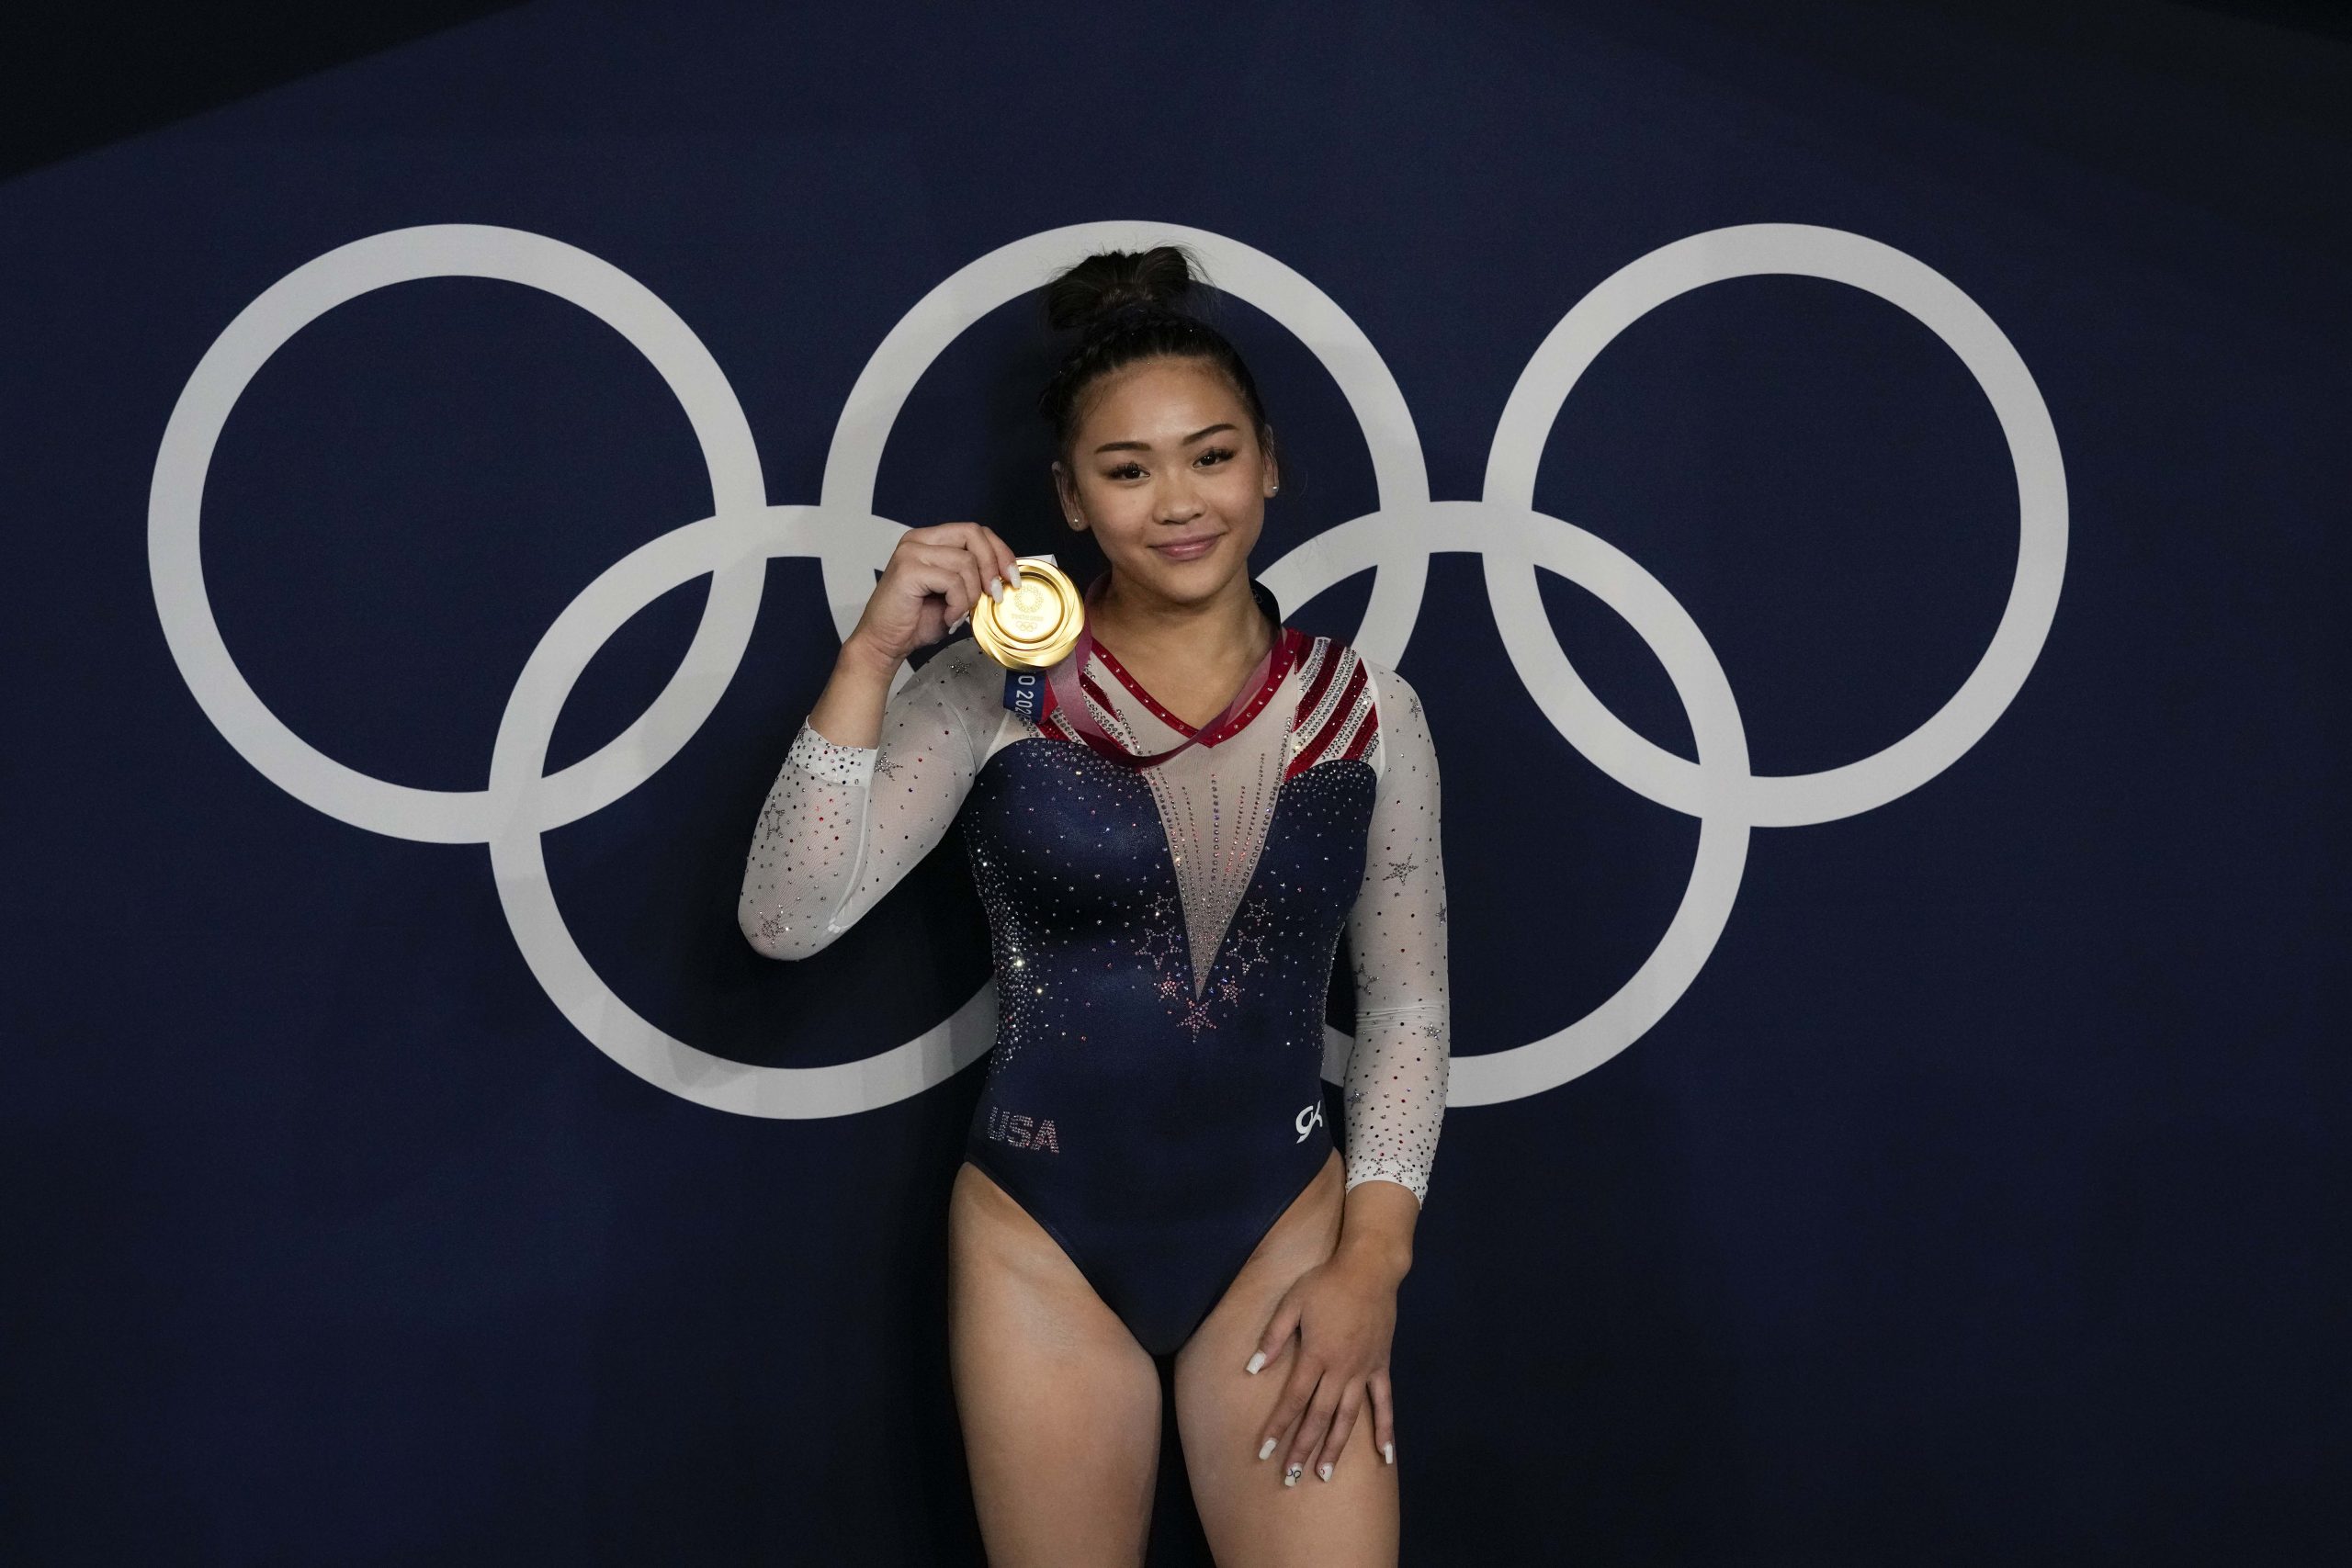 Tokyo Olympics: Sunisa Lee’s gymnastics gold and the pride of the Hmong